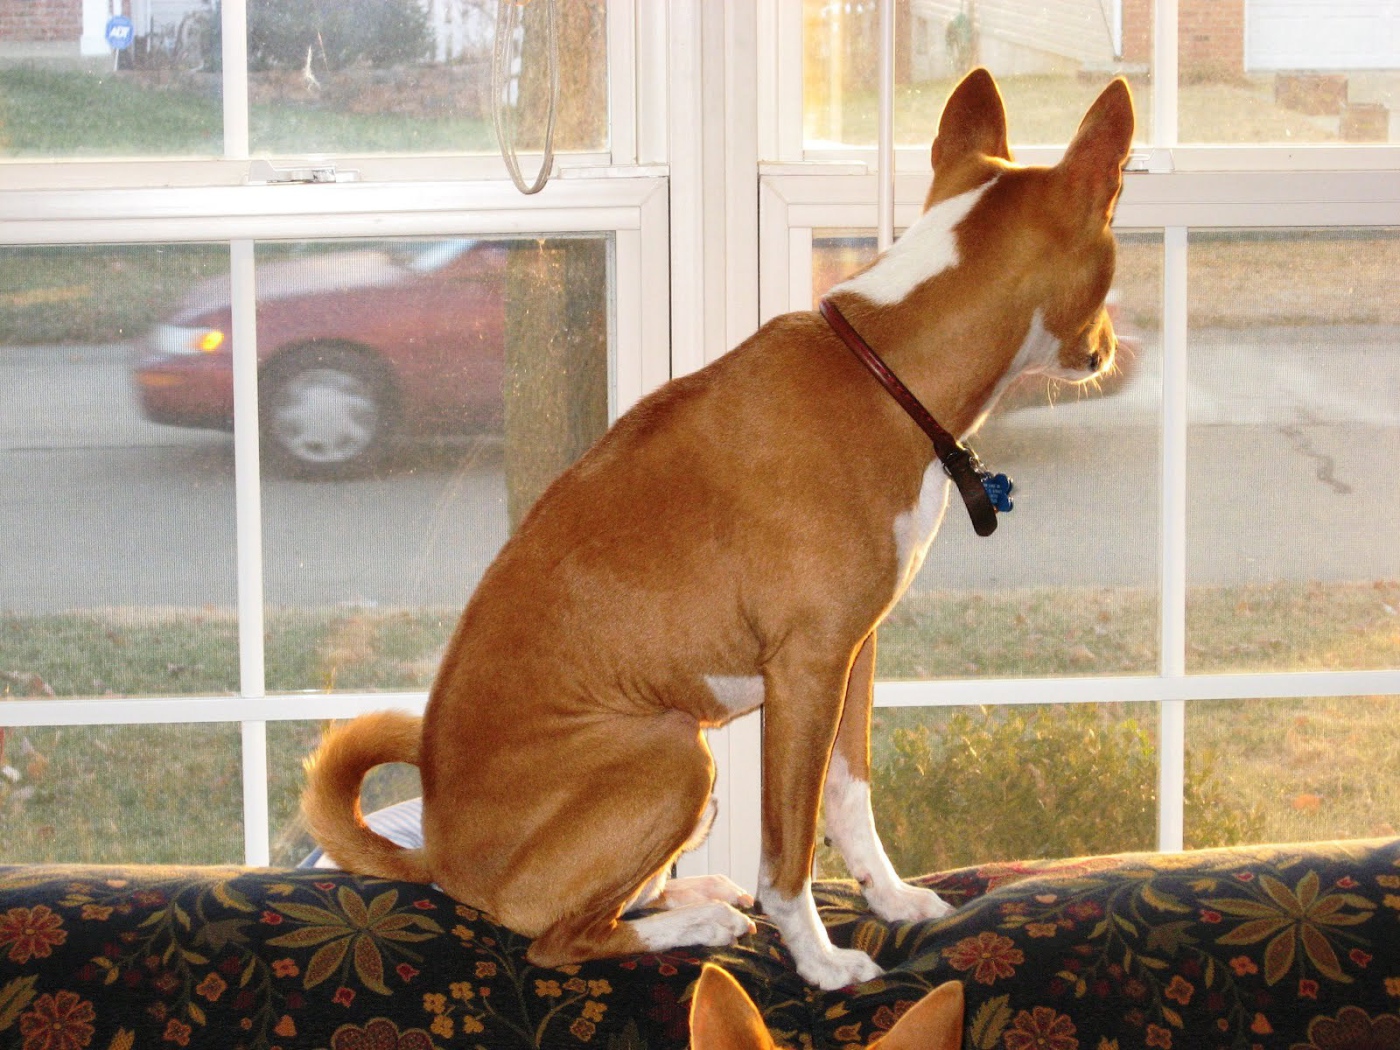 Basenji breed dog is waiting for owner